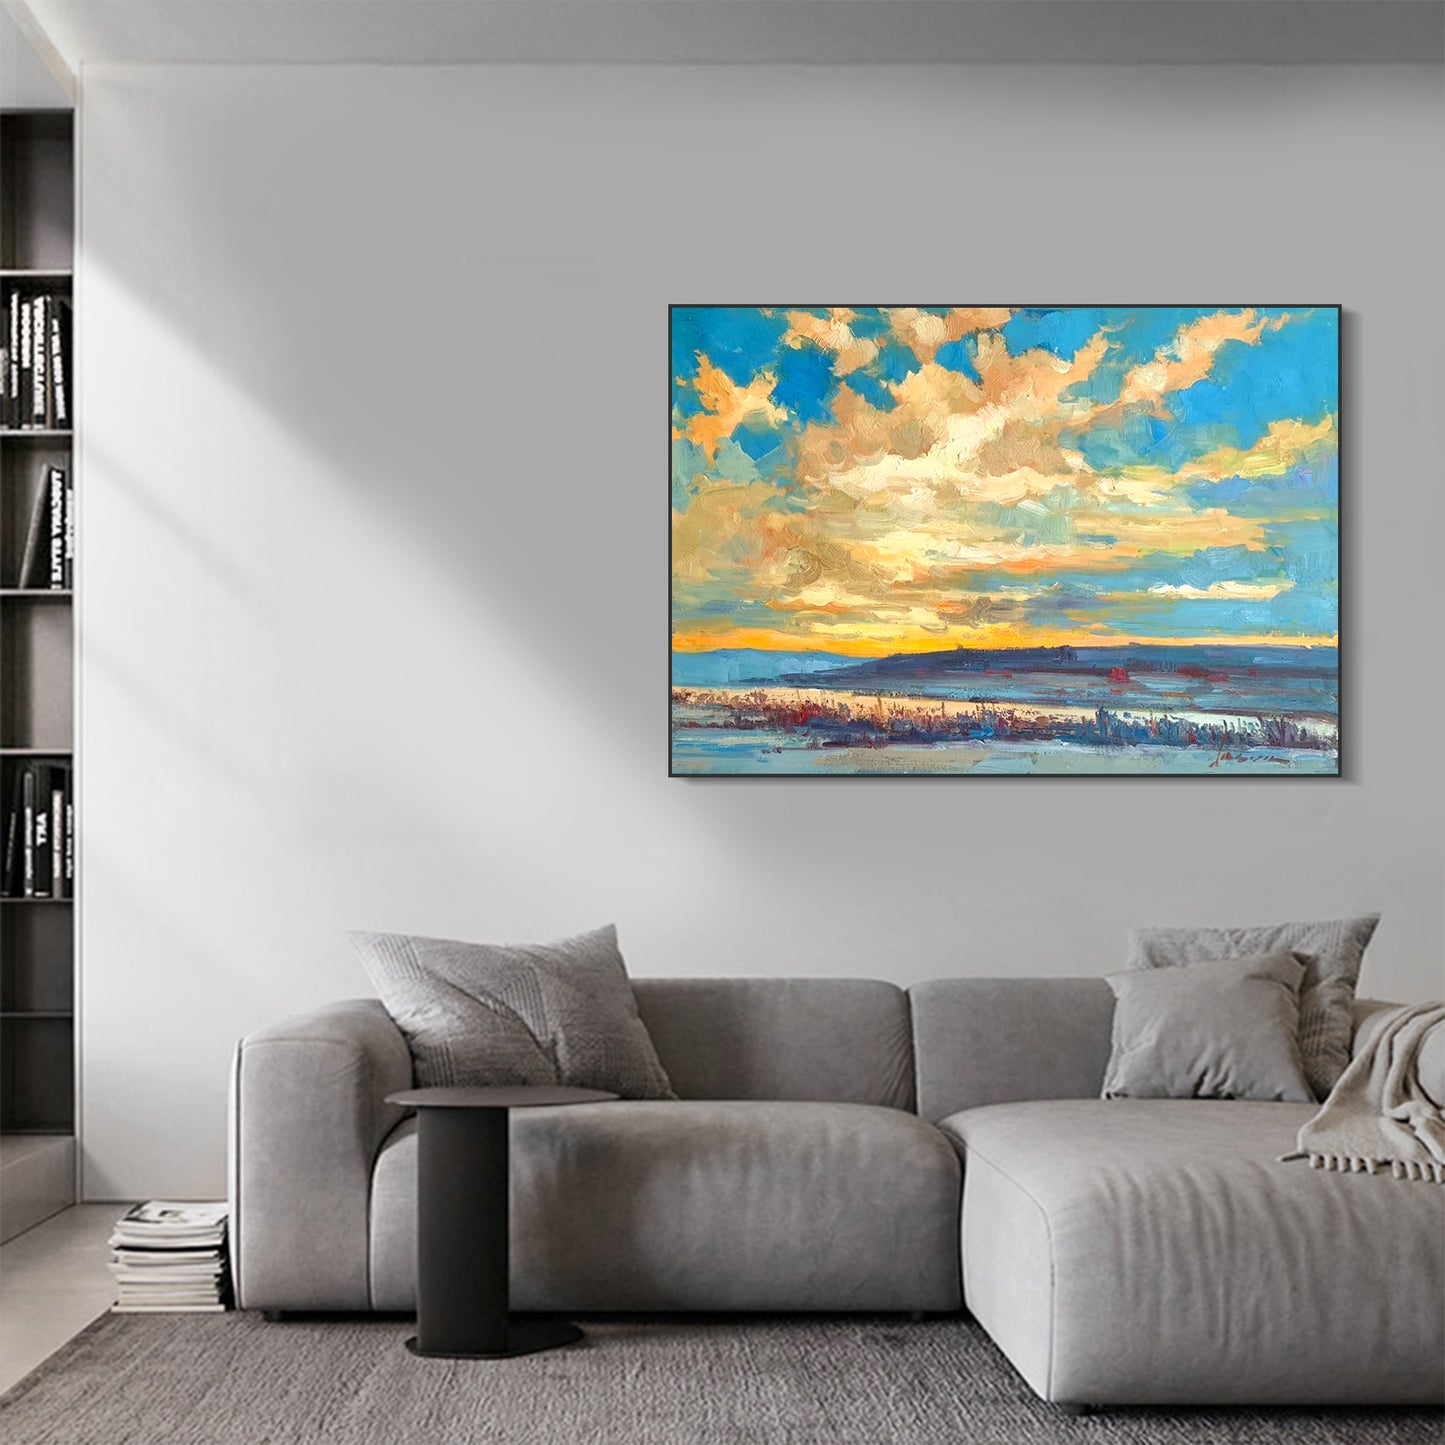 LANDSCAPE PAINTING, AFTERGLOW, HAND-PAINTED CANVAS